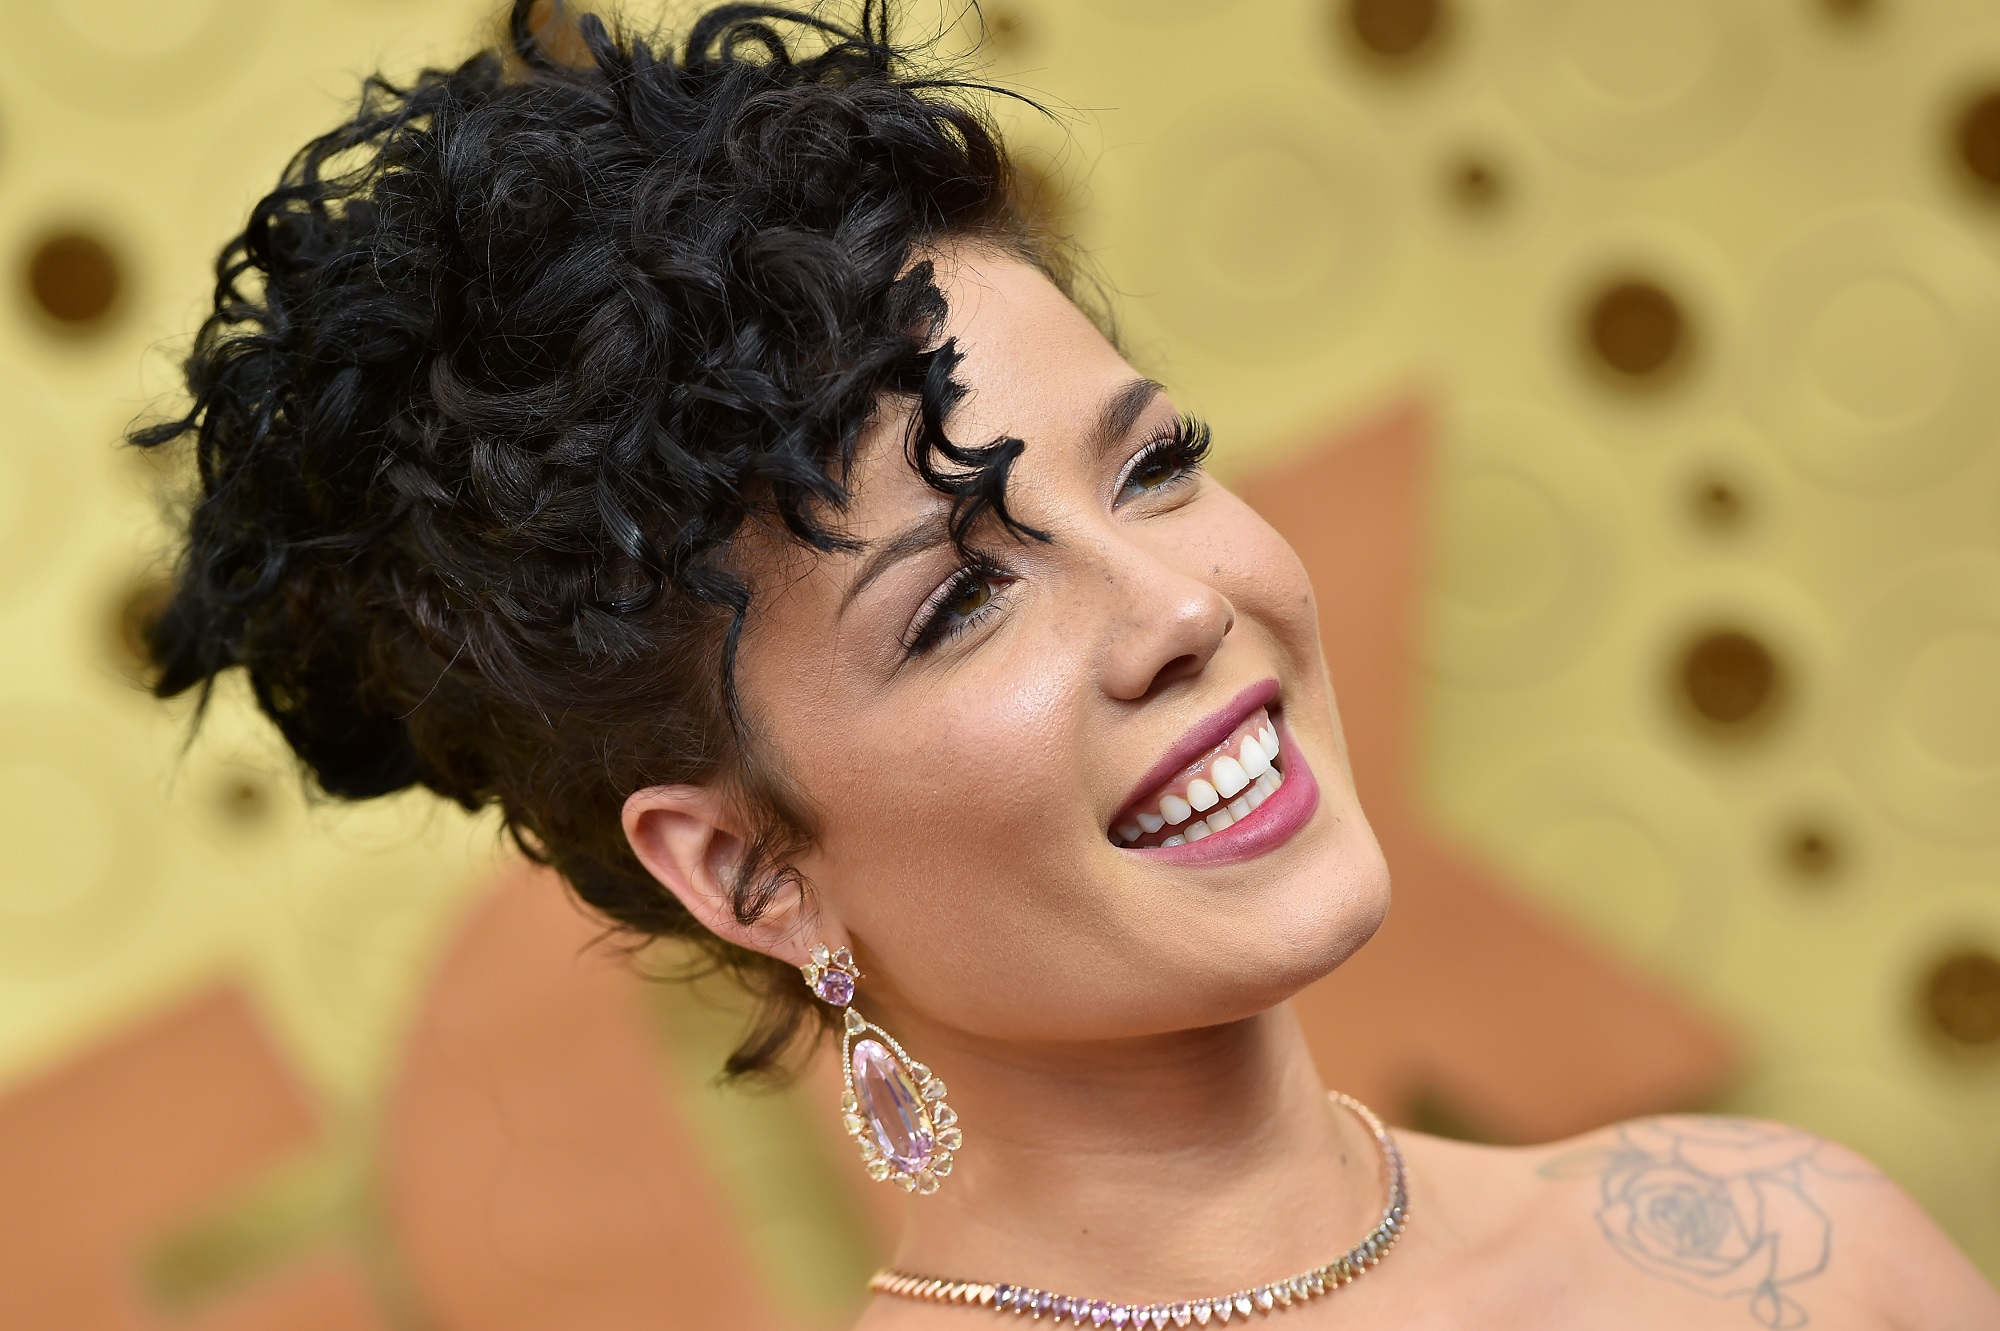 Halsey smiles on the red carpet of the 71st Emmy Awards in 2019